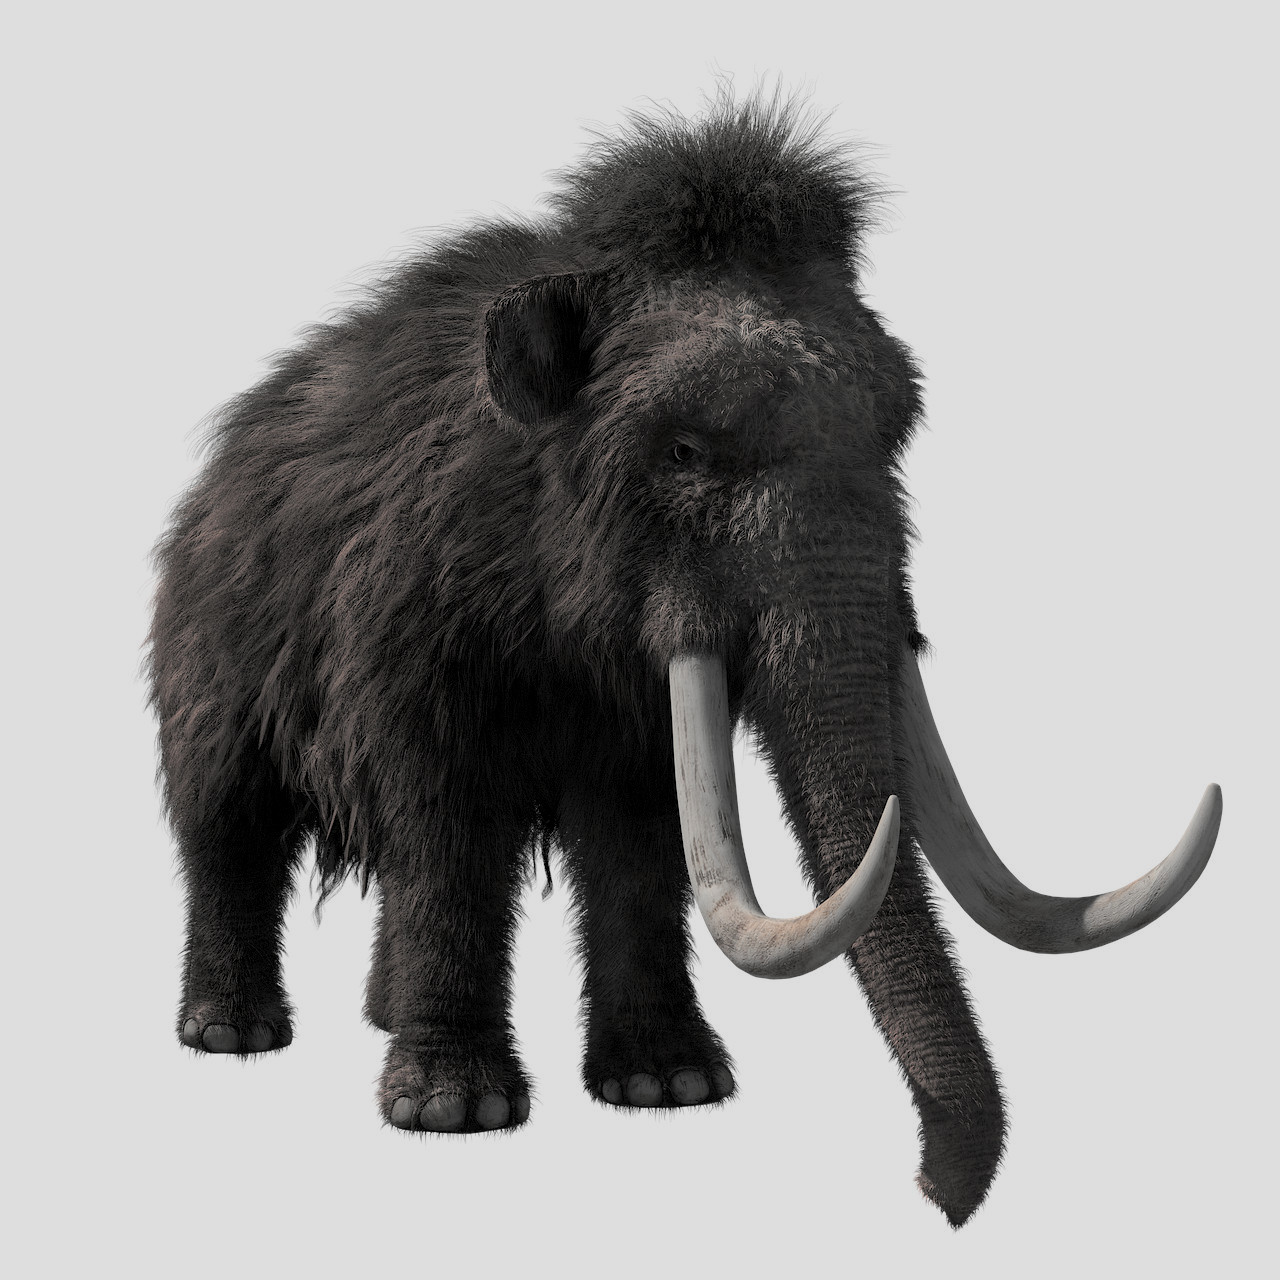 A greyscale image of a mammoth